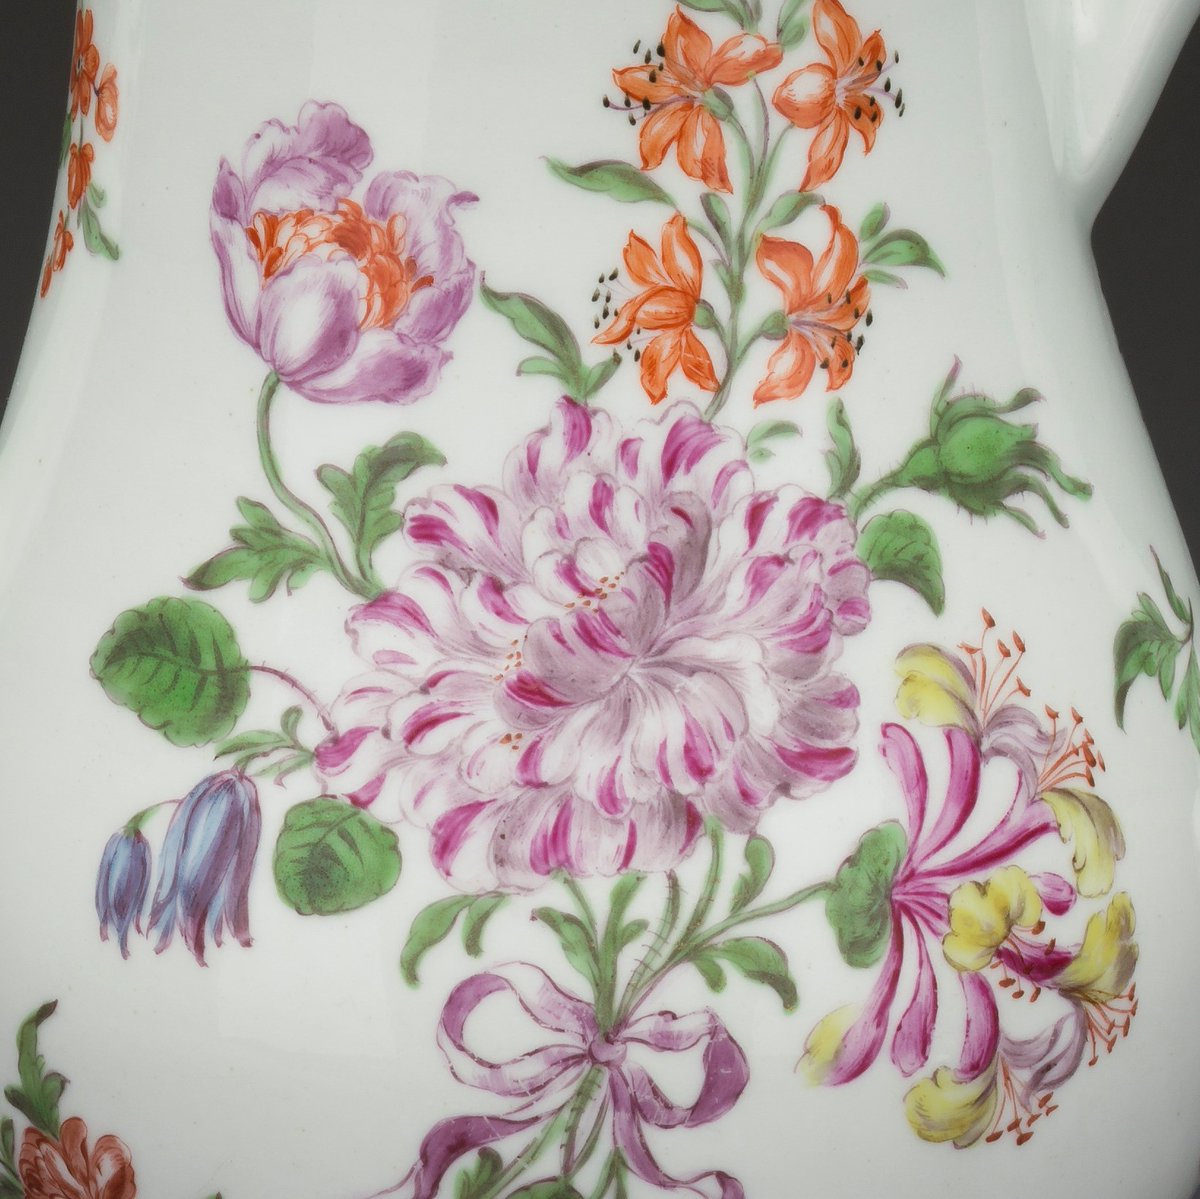 #Sponsor this #MuseumBouquet for #MothersDay. 'The Coffee Pot Bouquet' is the perfect gift for #coffeedrinkers, #flowerlovers and the genteel lady who adores the #18thcentury
museumofroyalworcester.org/product/sponso…
#FlowersonFriday #antiqueporcelain #ceramics #HeritageMatters @The_FPSLondon